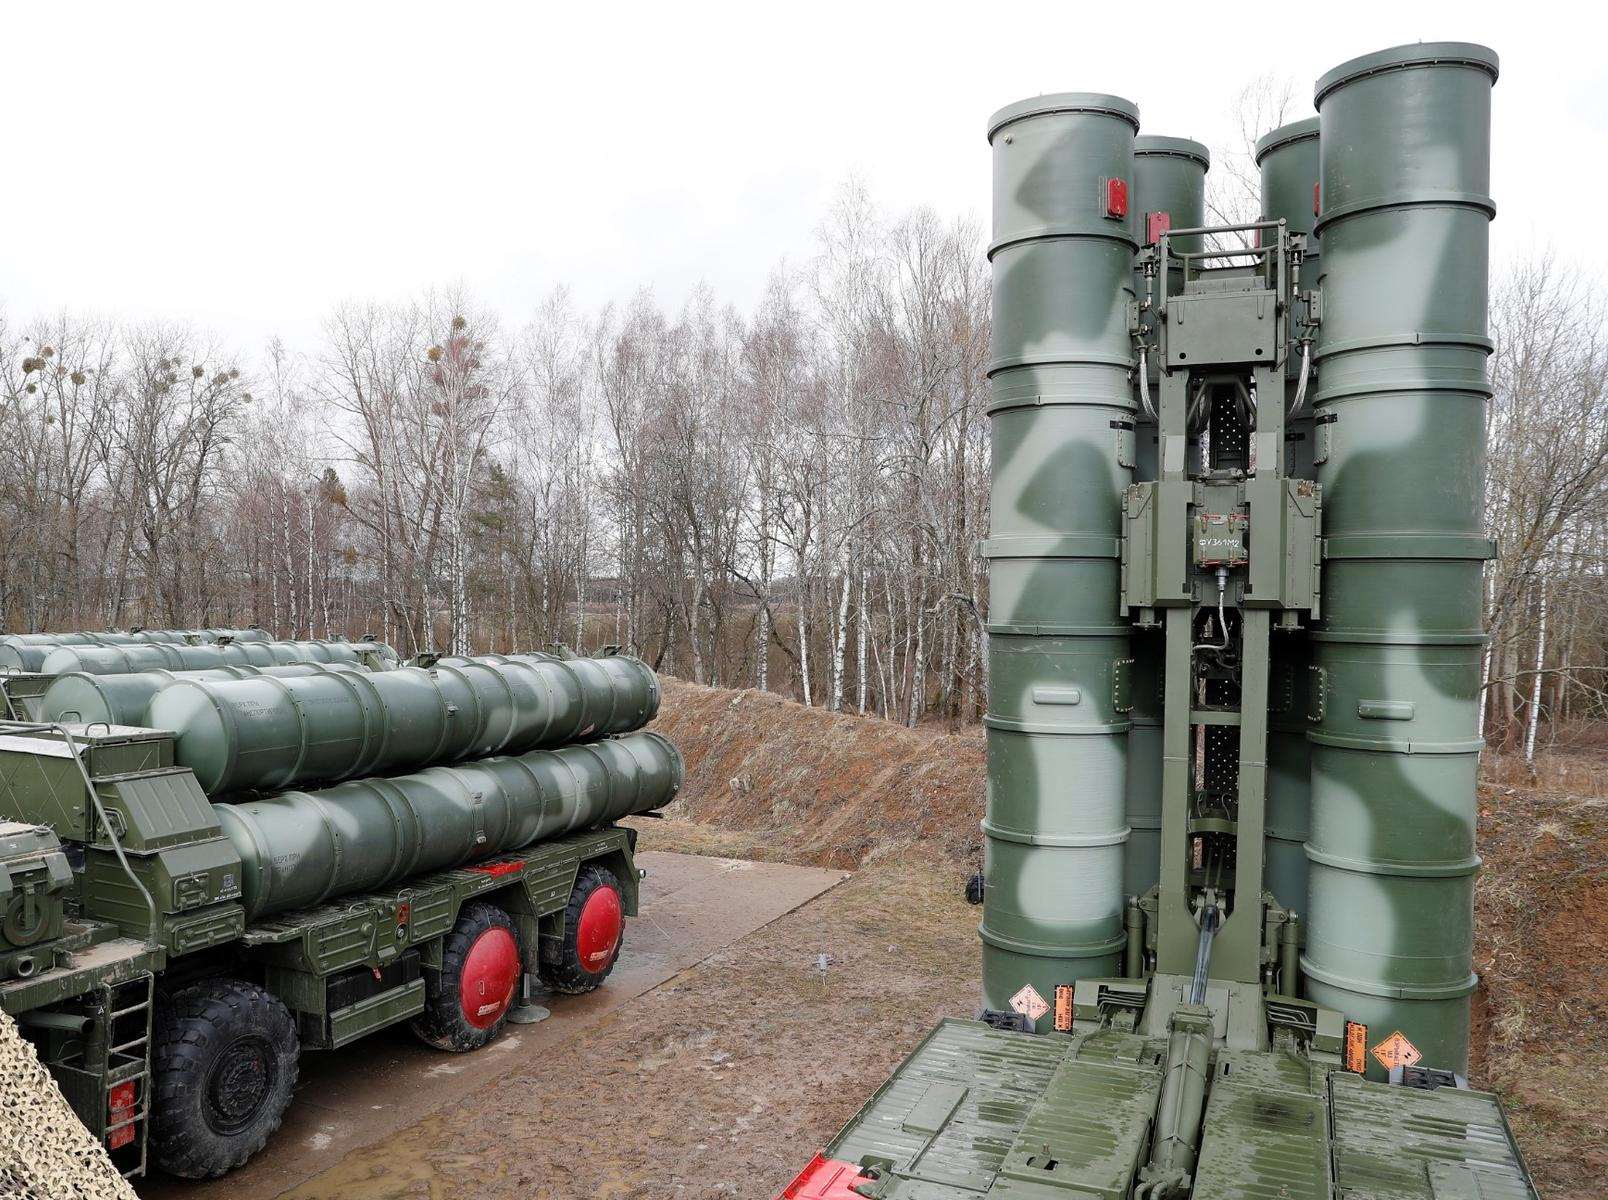 Russia's S-400 Vs America's Aegis And Patriot: Battle Of The Air Defense Giants!